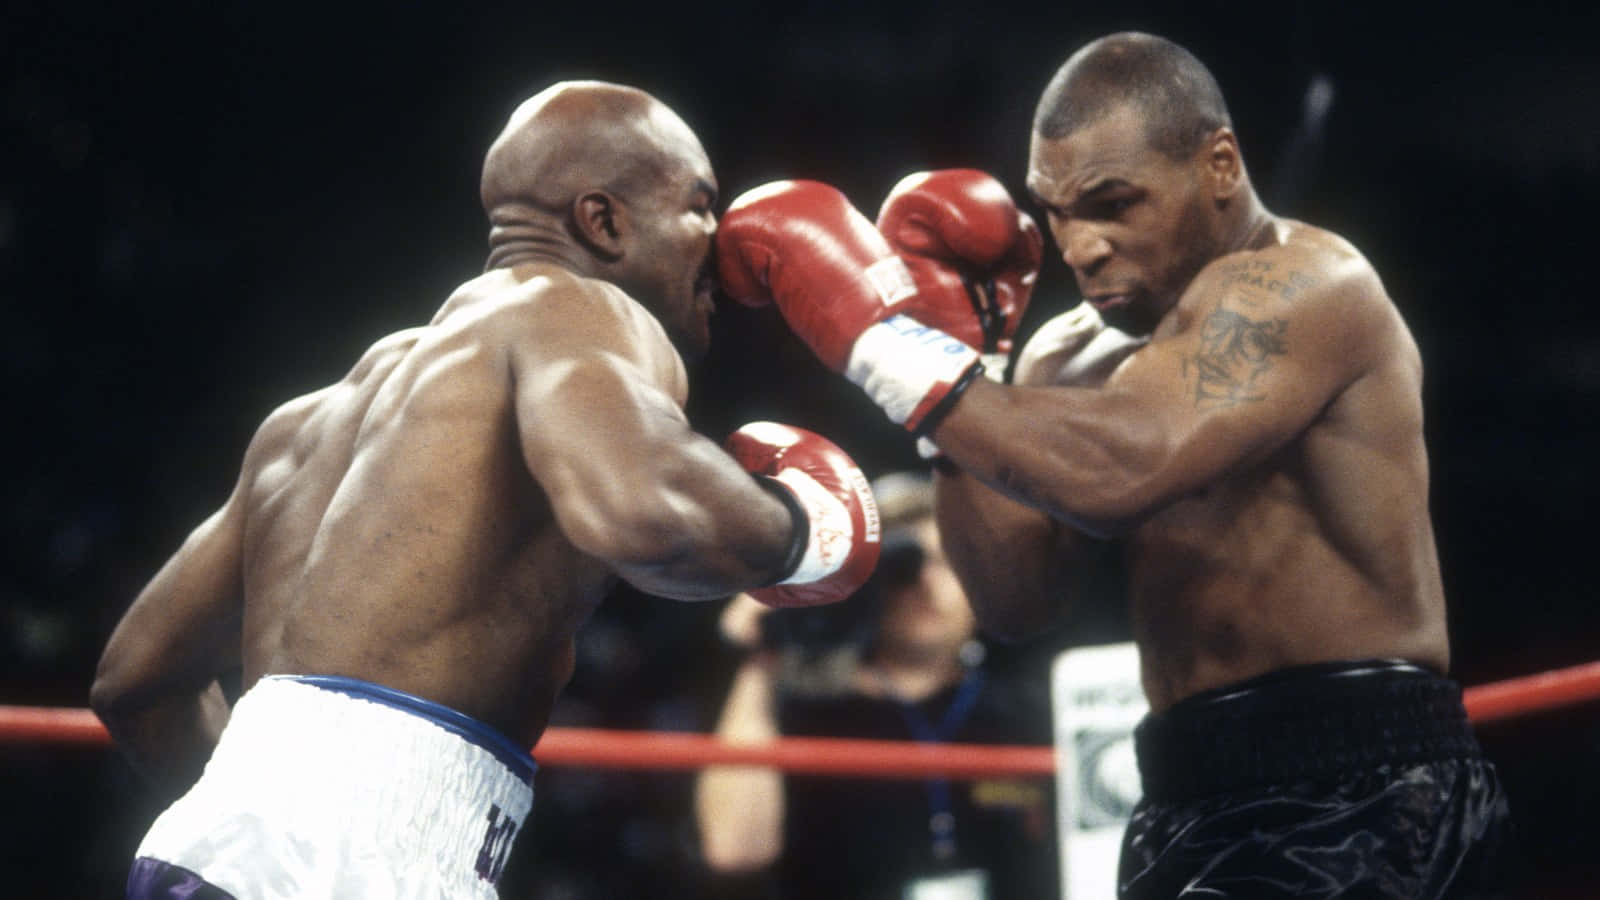 Iron Mike Tyson - A Legend in the Ring